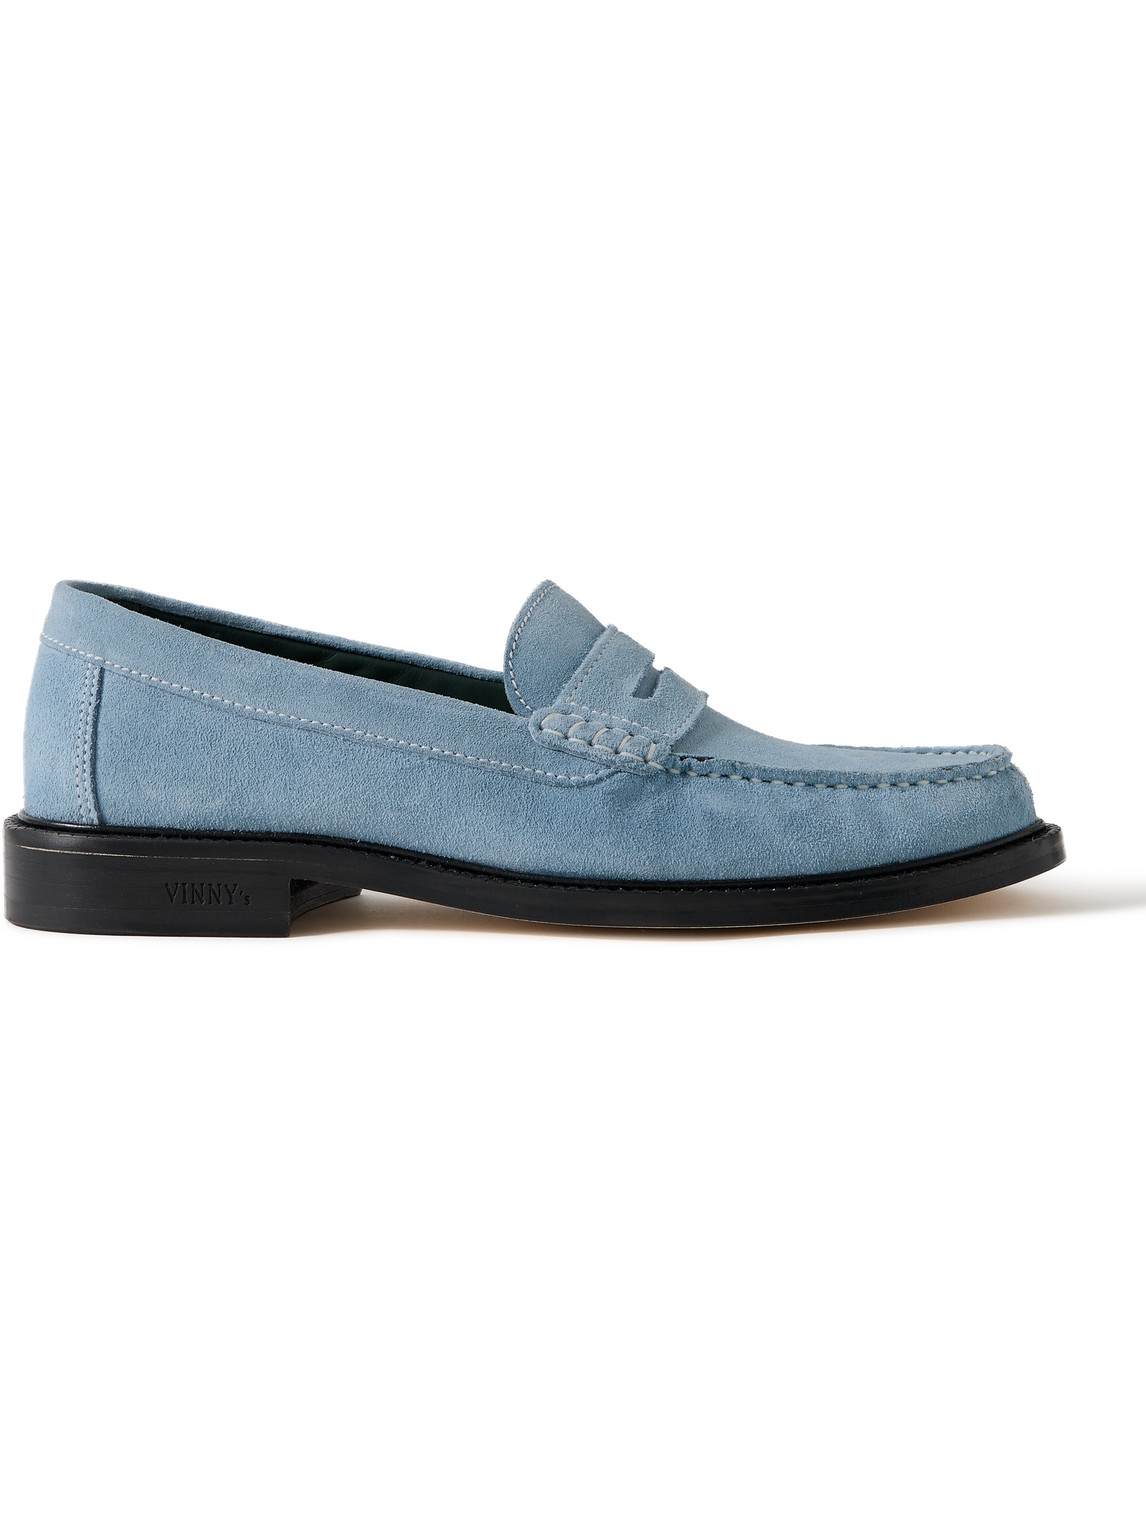 Yardee Suede Penny Loafers